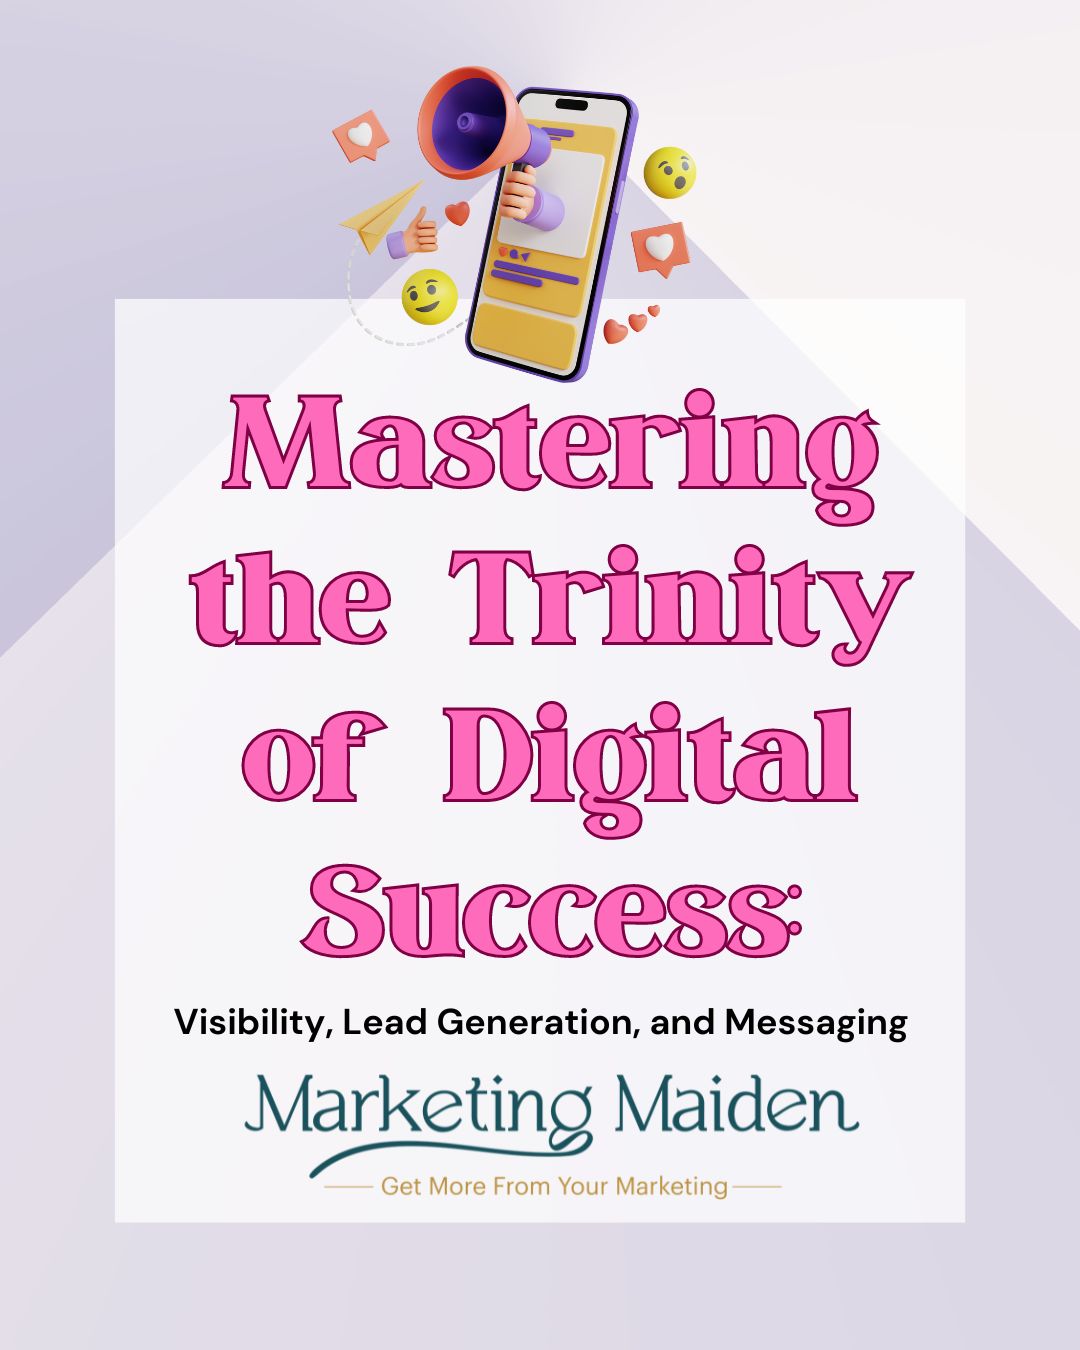 Mastering the Trinity of Digital Success: Visibility, Lead Generation, and Messaging